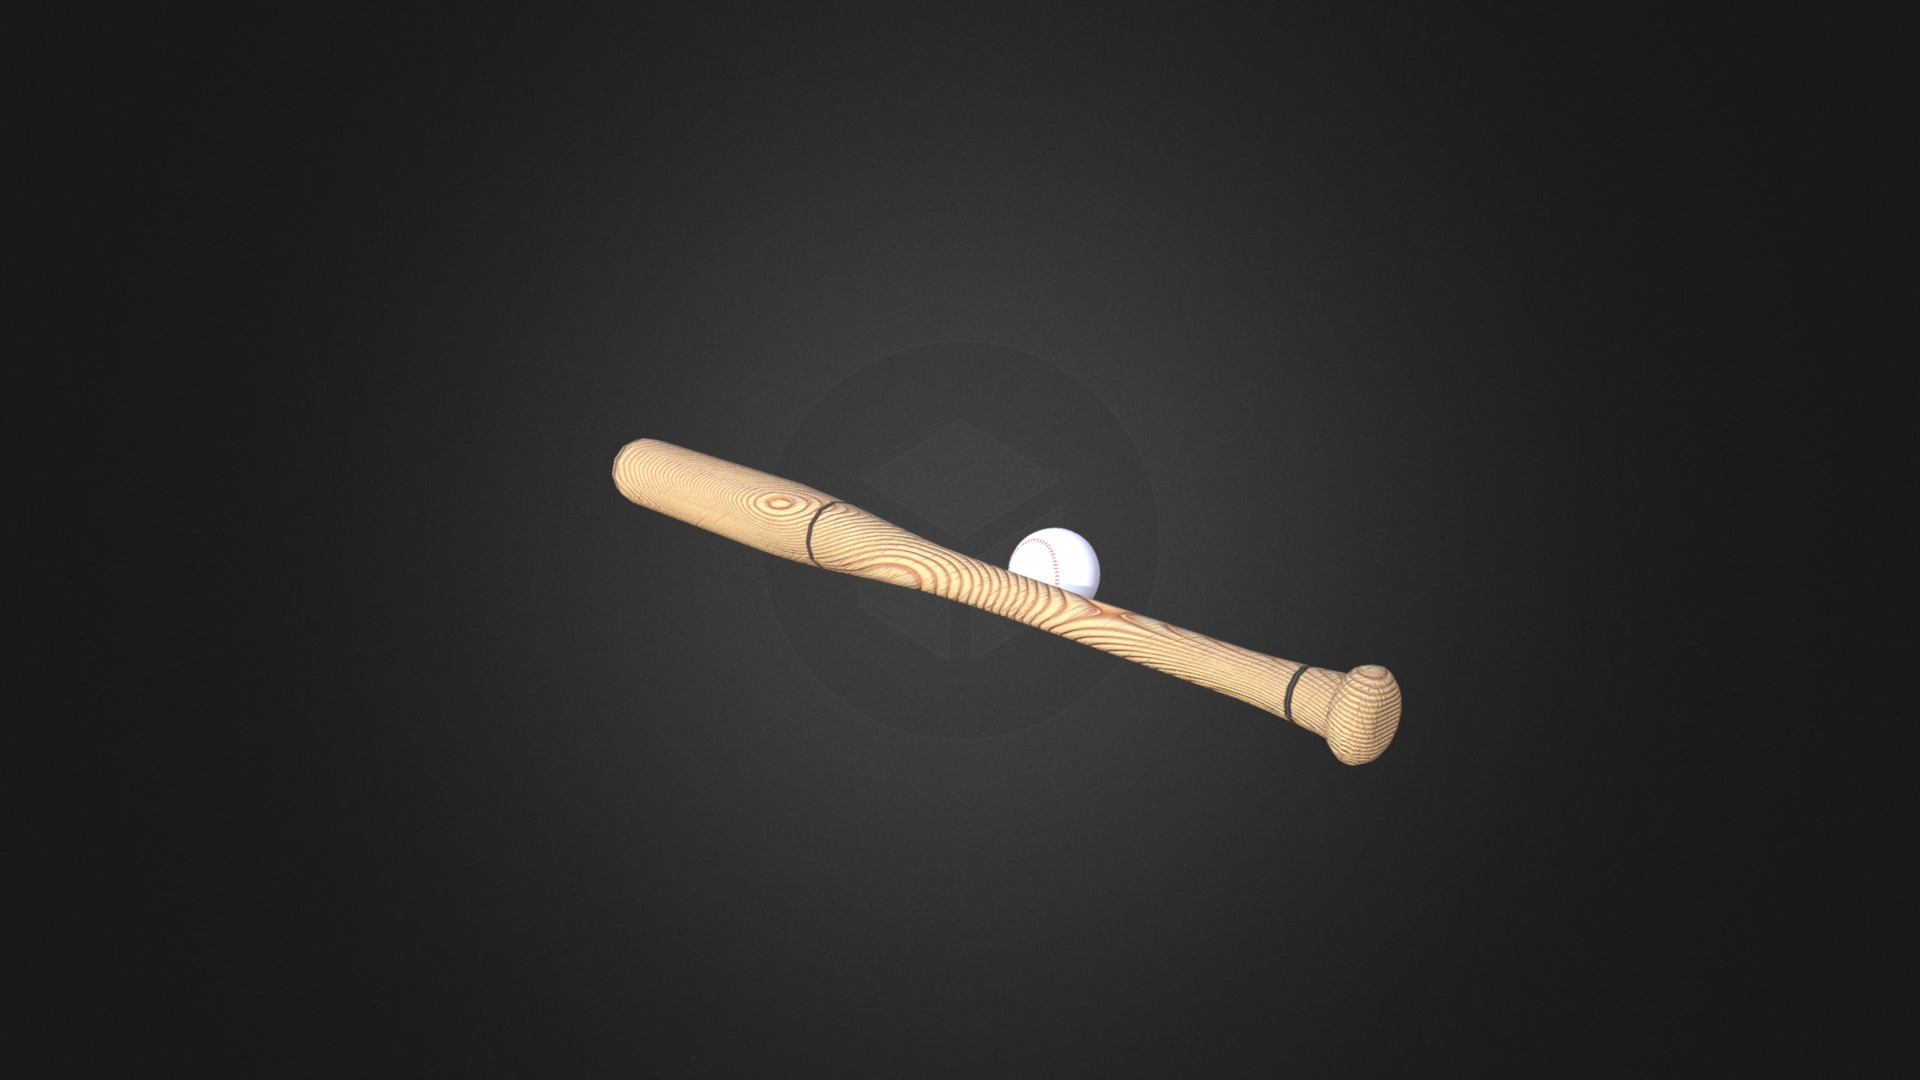 3D model Baseball Bat and a Ball - This is a 3D model of the Baseball Bat and a Ball. The 3D model is about a light bulb on a black background.